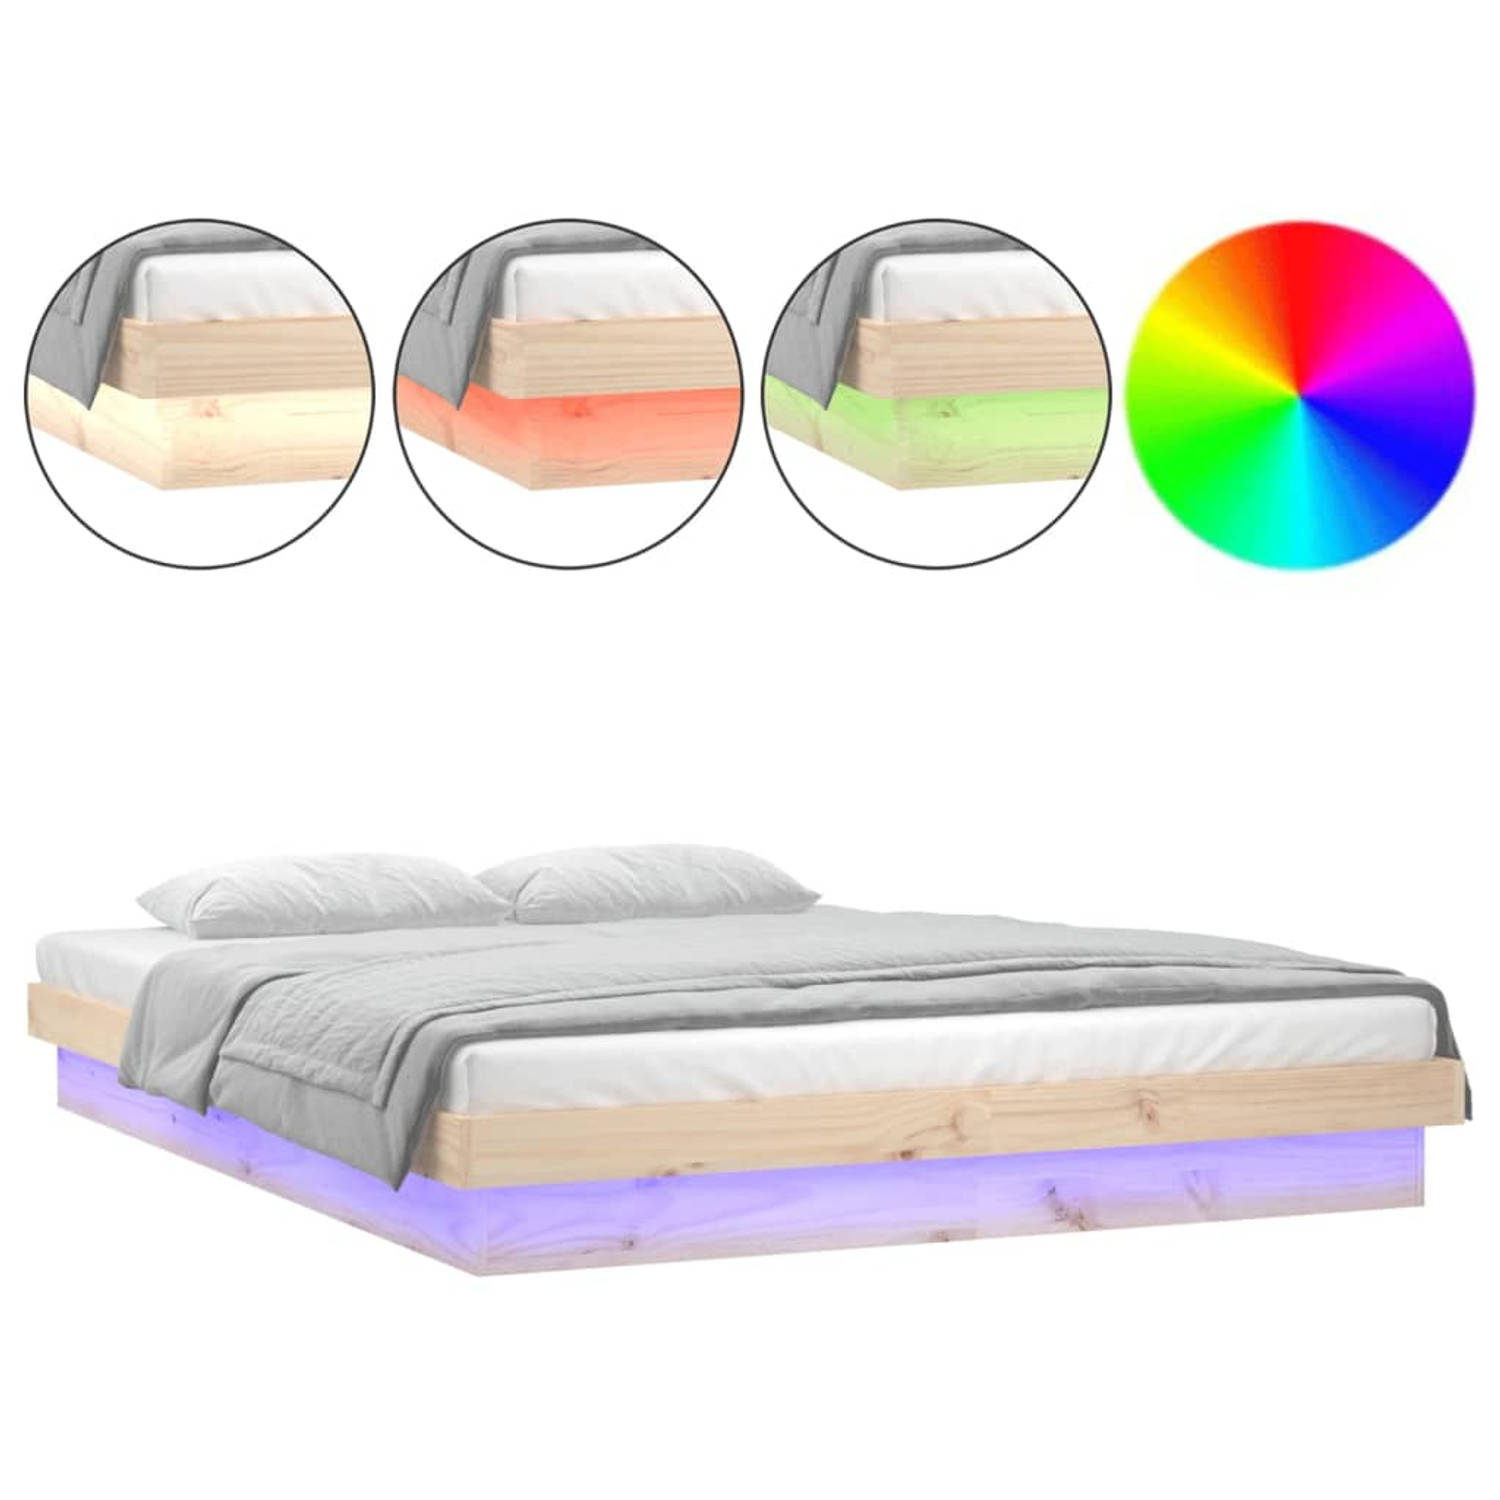 The Living Store Bedframe LED massief hout 140x200 cm - Bedframe - Bedframes - Eenpersoonsbed - Bed - Bedombouw - Ledikant - Houten Bedframe - Eenpersoonsbedden - Bedden - Bedombou